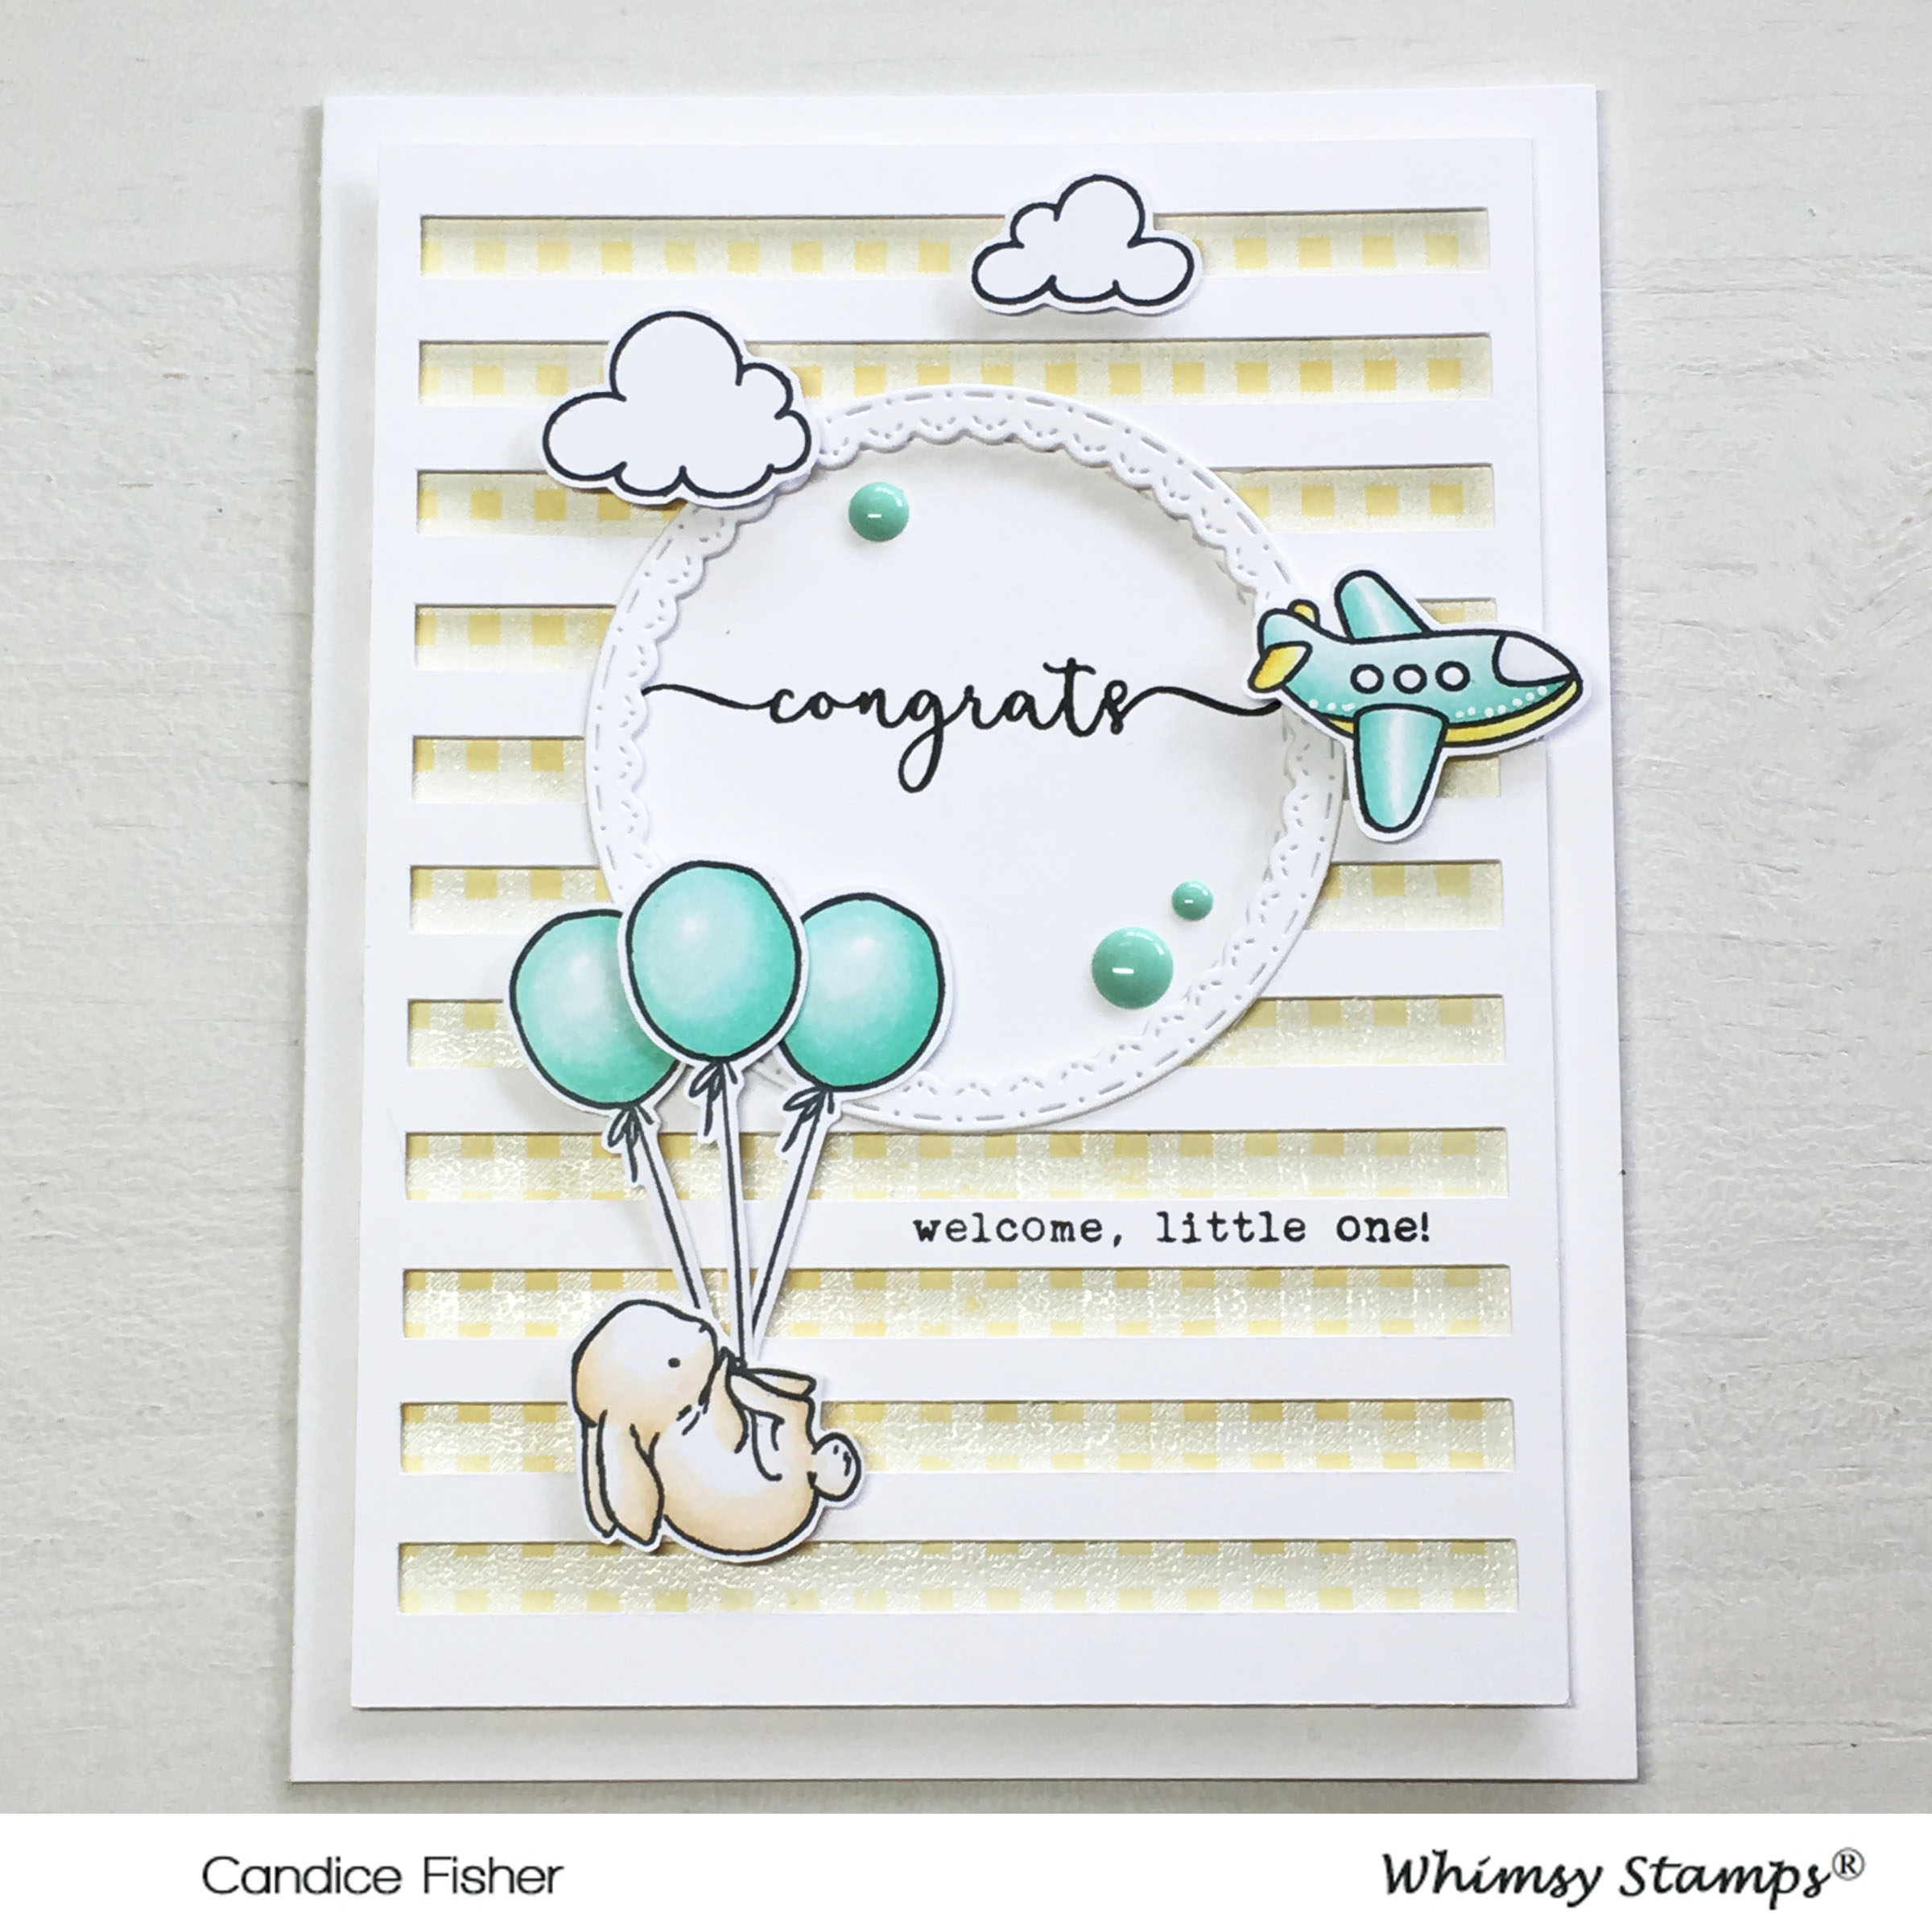 GD whimsy stamps card 4